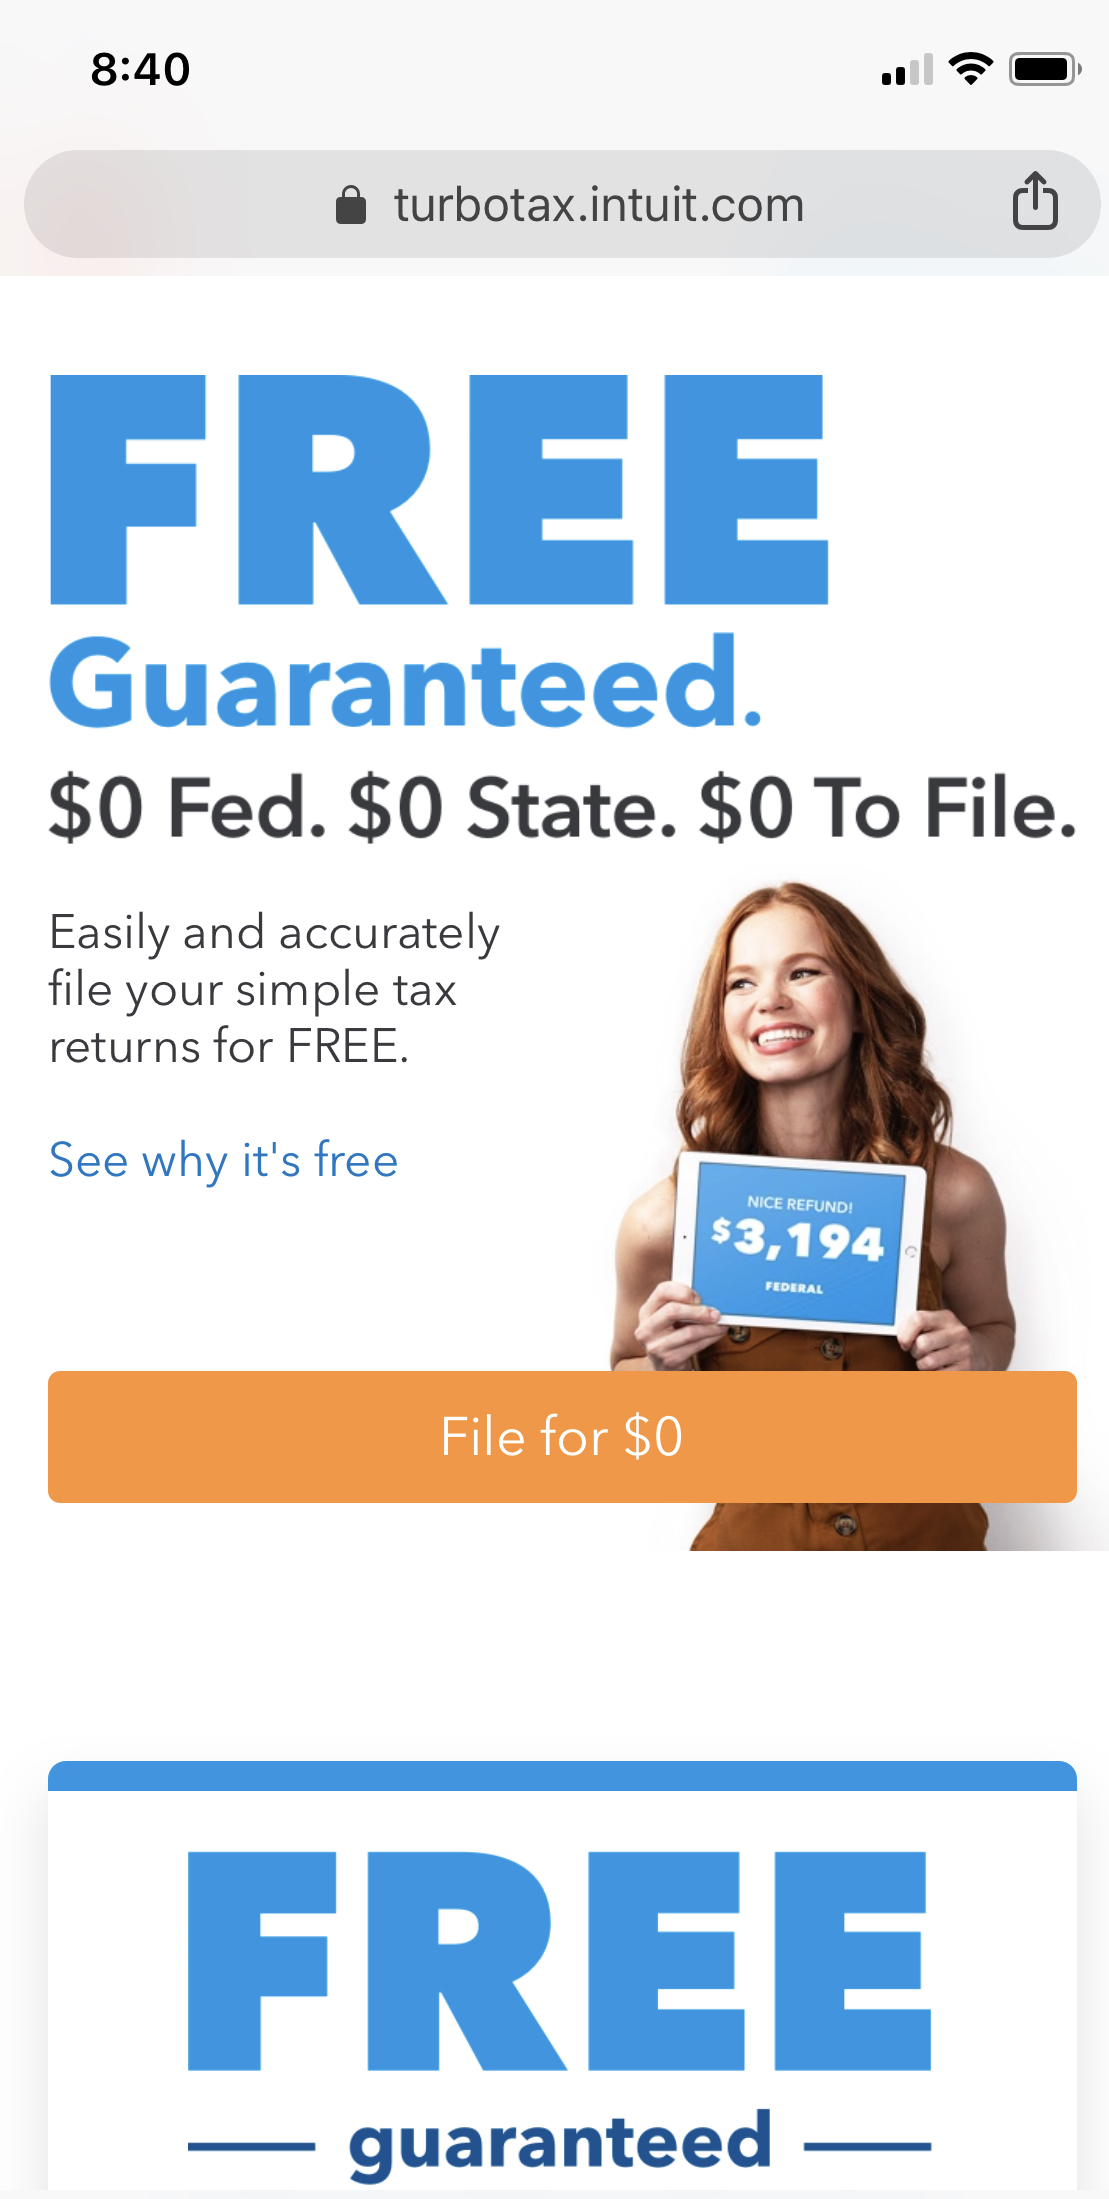 TurboTax Free offer seems too good to be true. Narrative Control to the rescue.